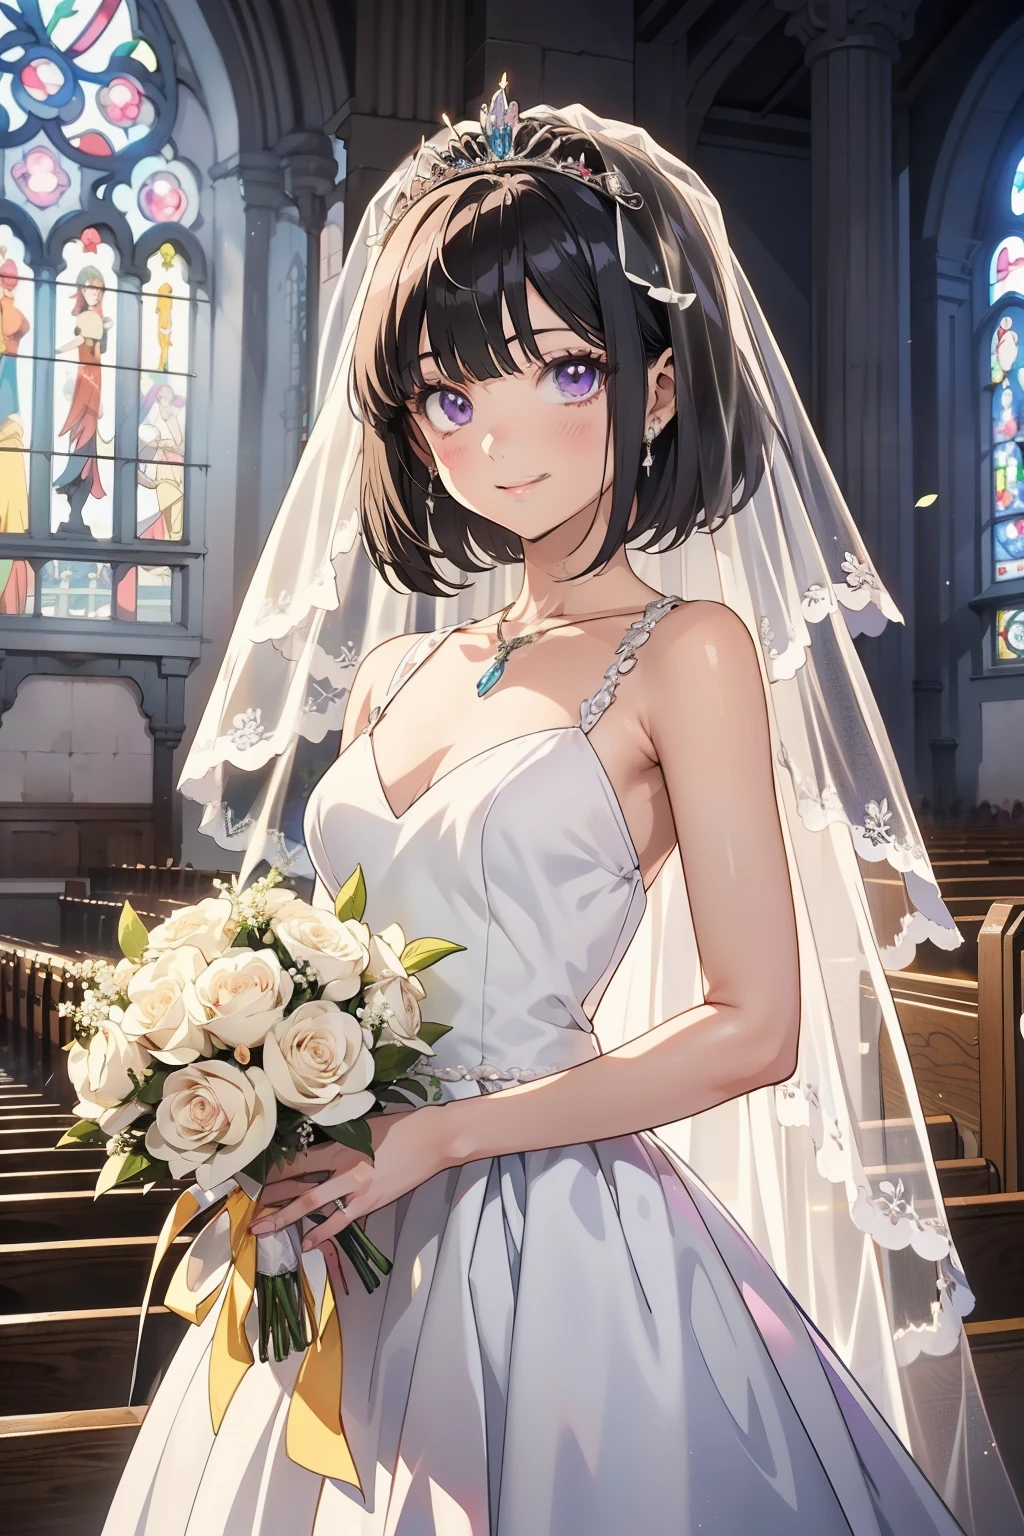 （masterpiece），（highest quality），（very detailed），（enlightenment），（ultra high resolution）, black hair, Anime adult woman wearing a white wedding dress, anime style, 2D rendering of an anime adult woman, realistic young anime adult woman, Smooth anime CG art, tiara, smile, purple eyes, small breasts, tall, Straight hair, short bob cut, slanted eyes, background is church, wedding veil, bouquet,